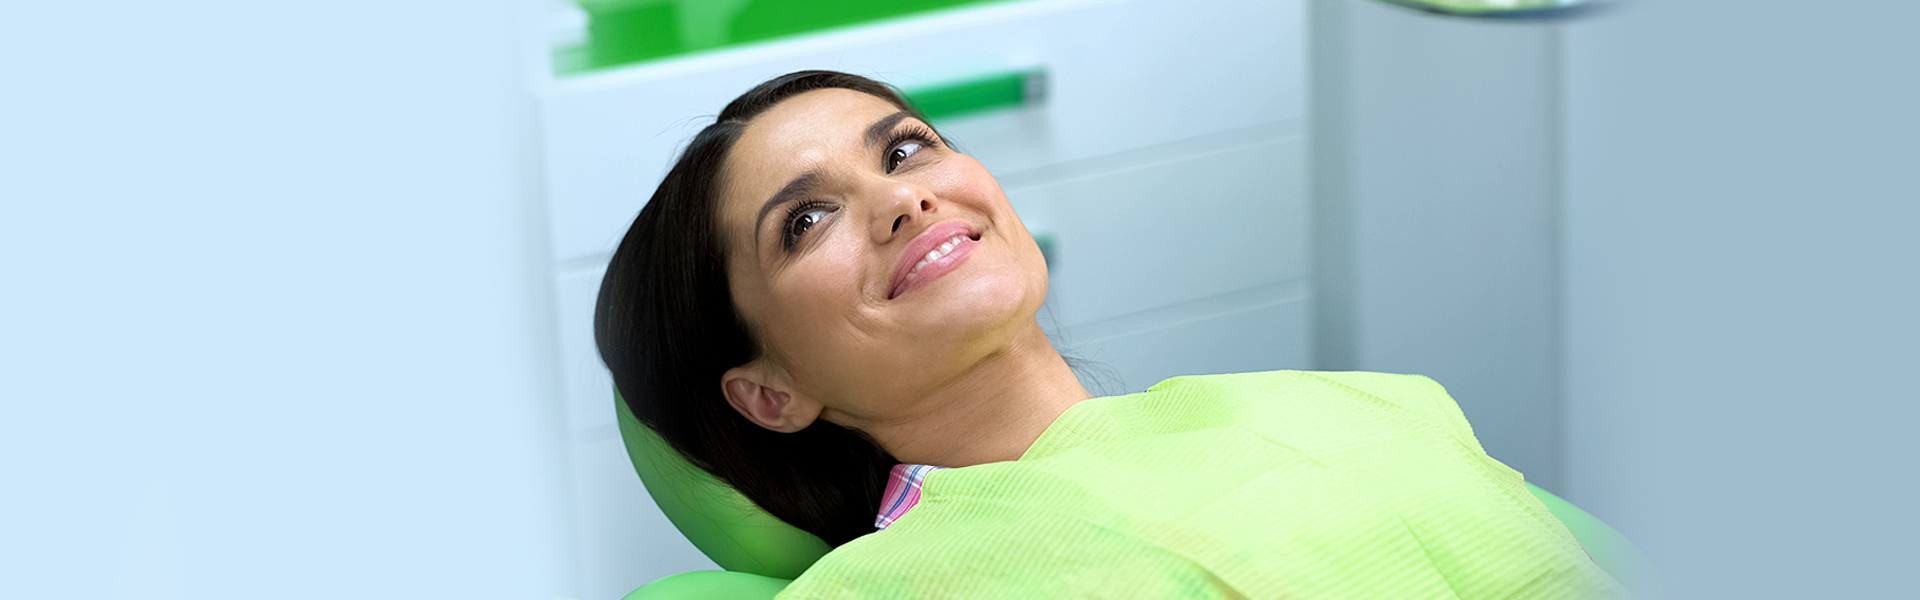 What Does the Dentist Look for in Oral Cancer Screenings?